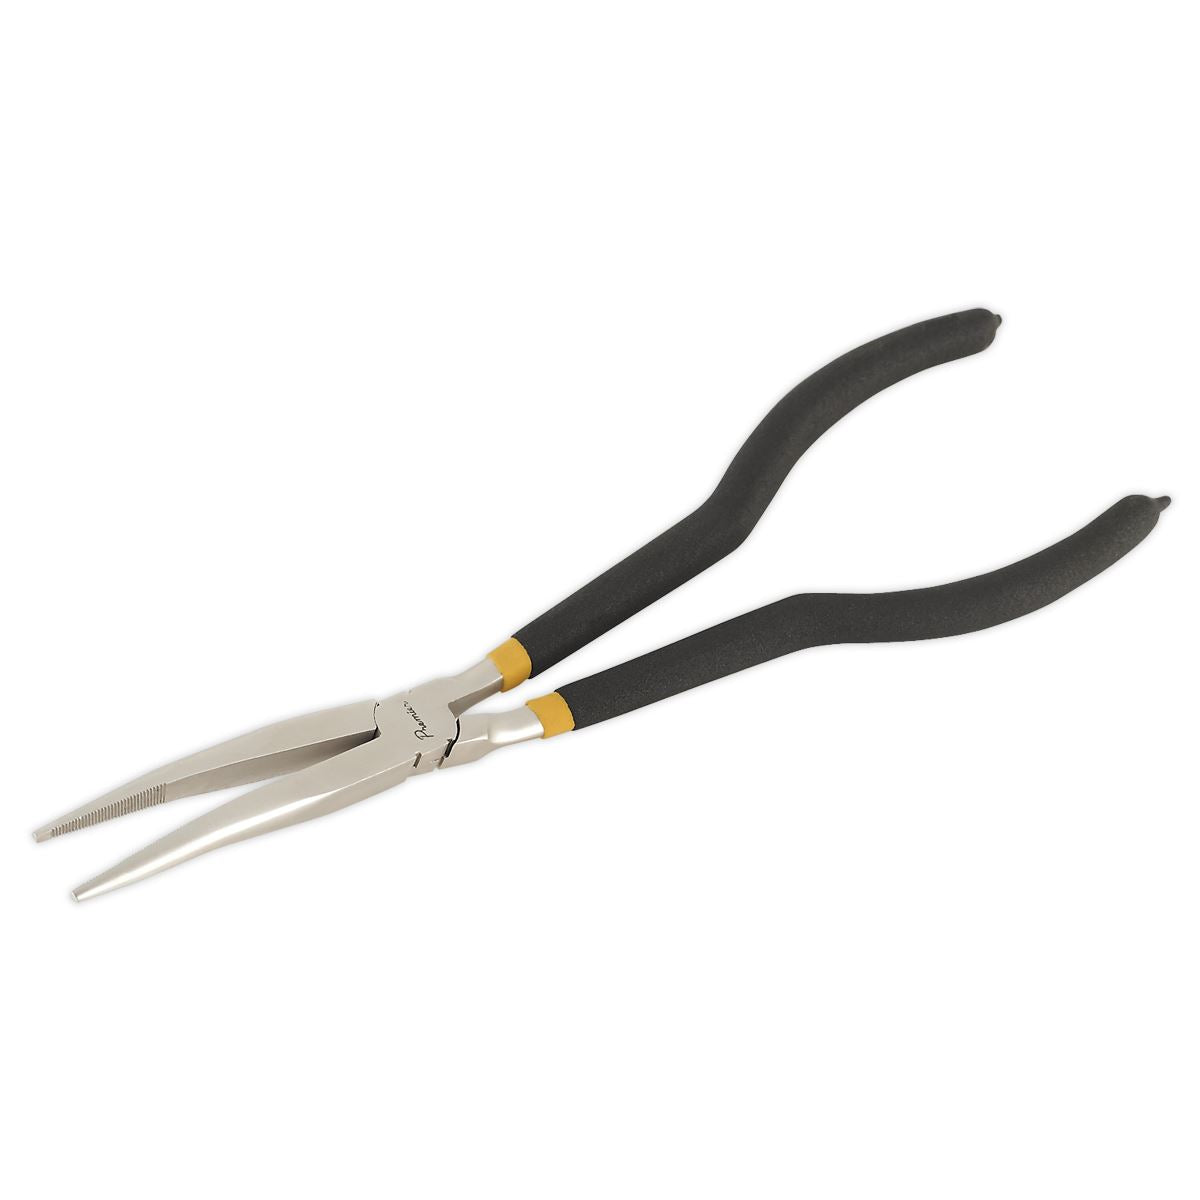 Sealey Premier Needle Nose Pliers 280mm Offset Ni-Fe Finish